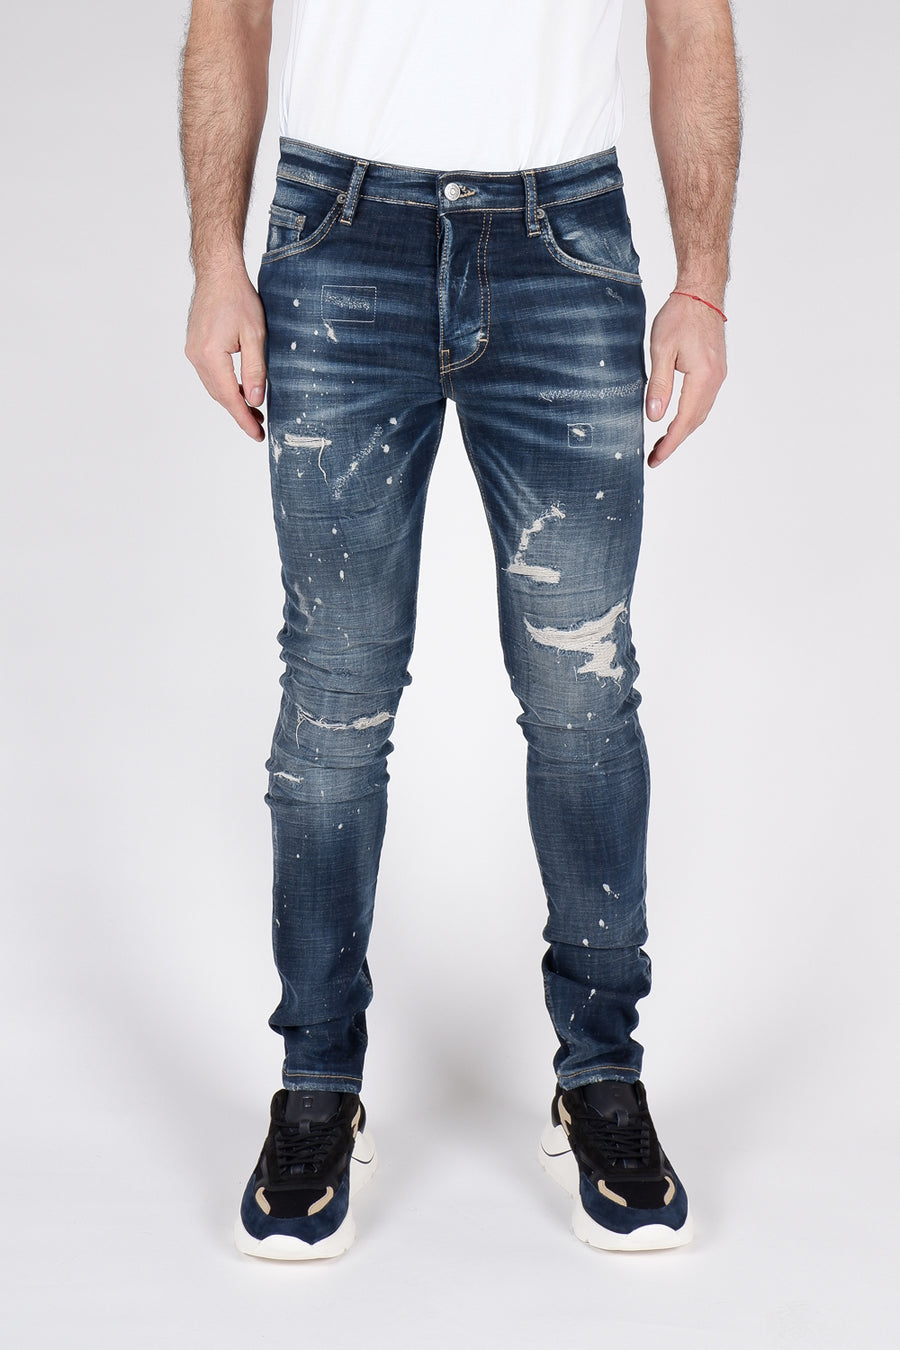 Buy the 7TH HVN Astro S2179 Jean Blue at Intro. Spend £50 for free UK delivery. Official stockists. We ship worldwide.